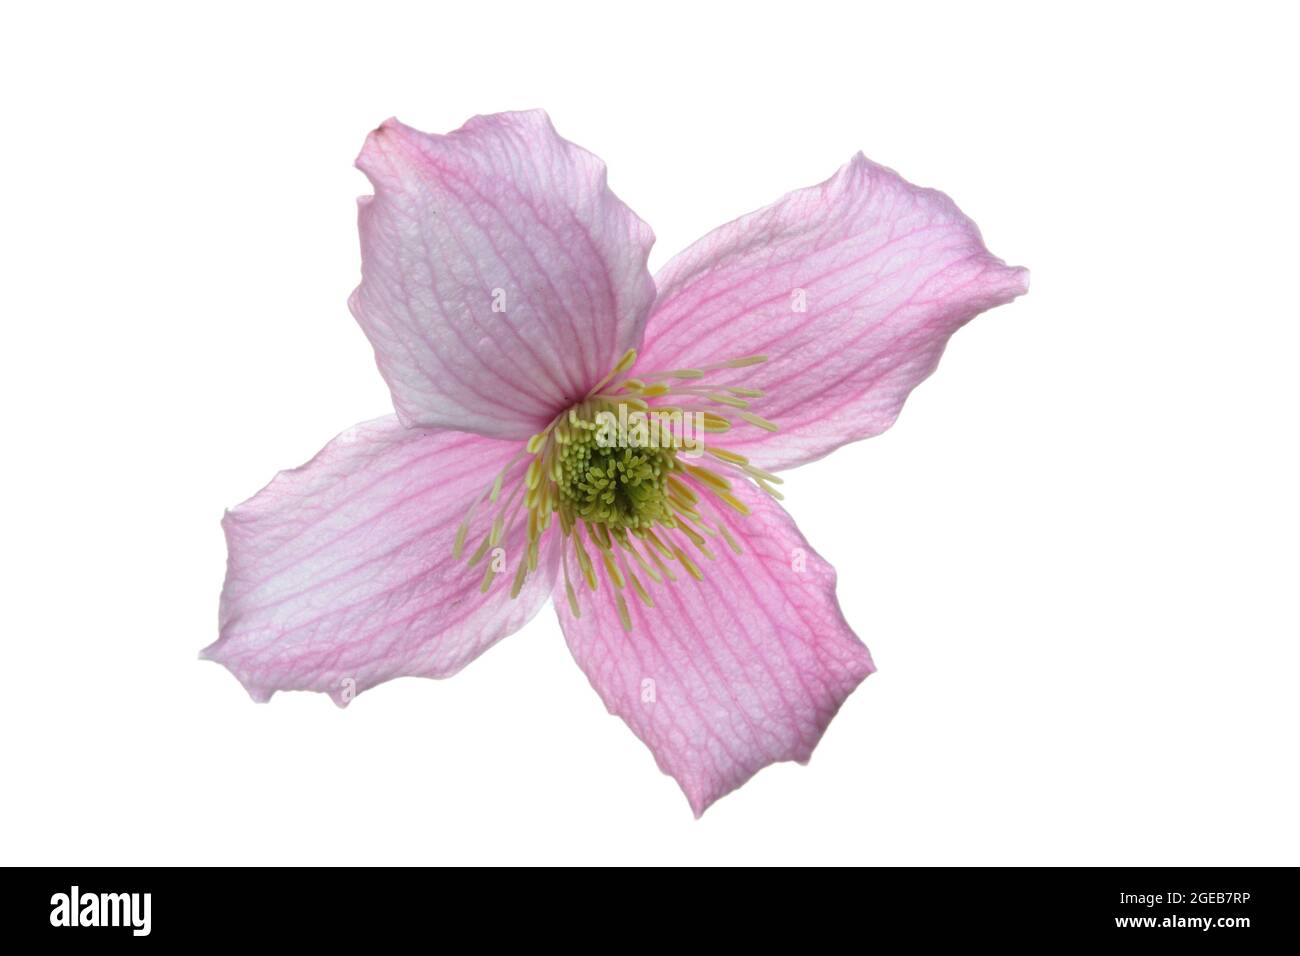 single open flower head of a Clematis Montana Wilsonii photographed against a white background Stock Photo